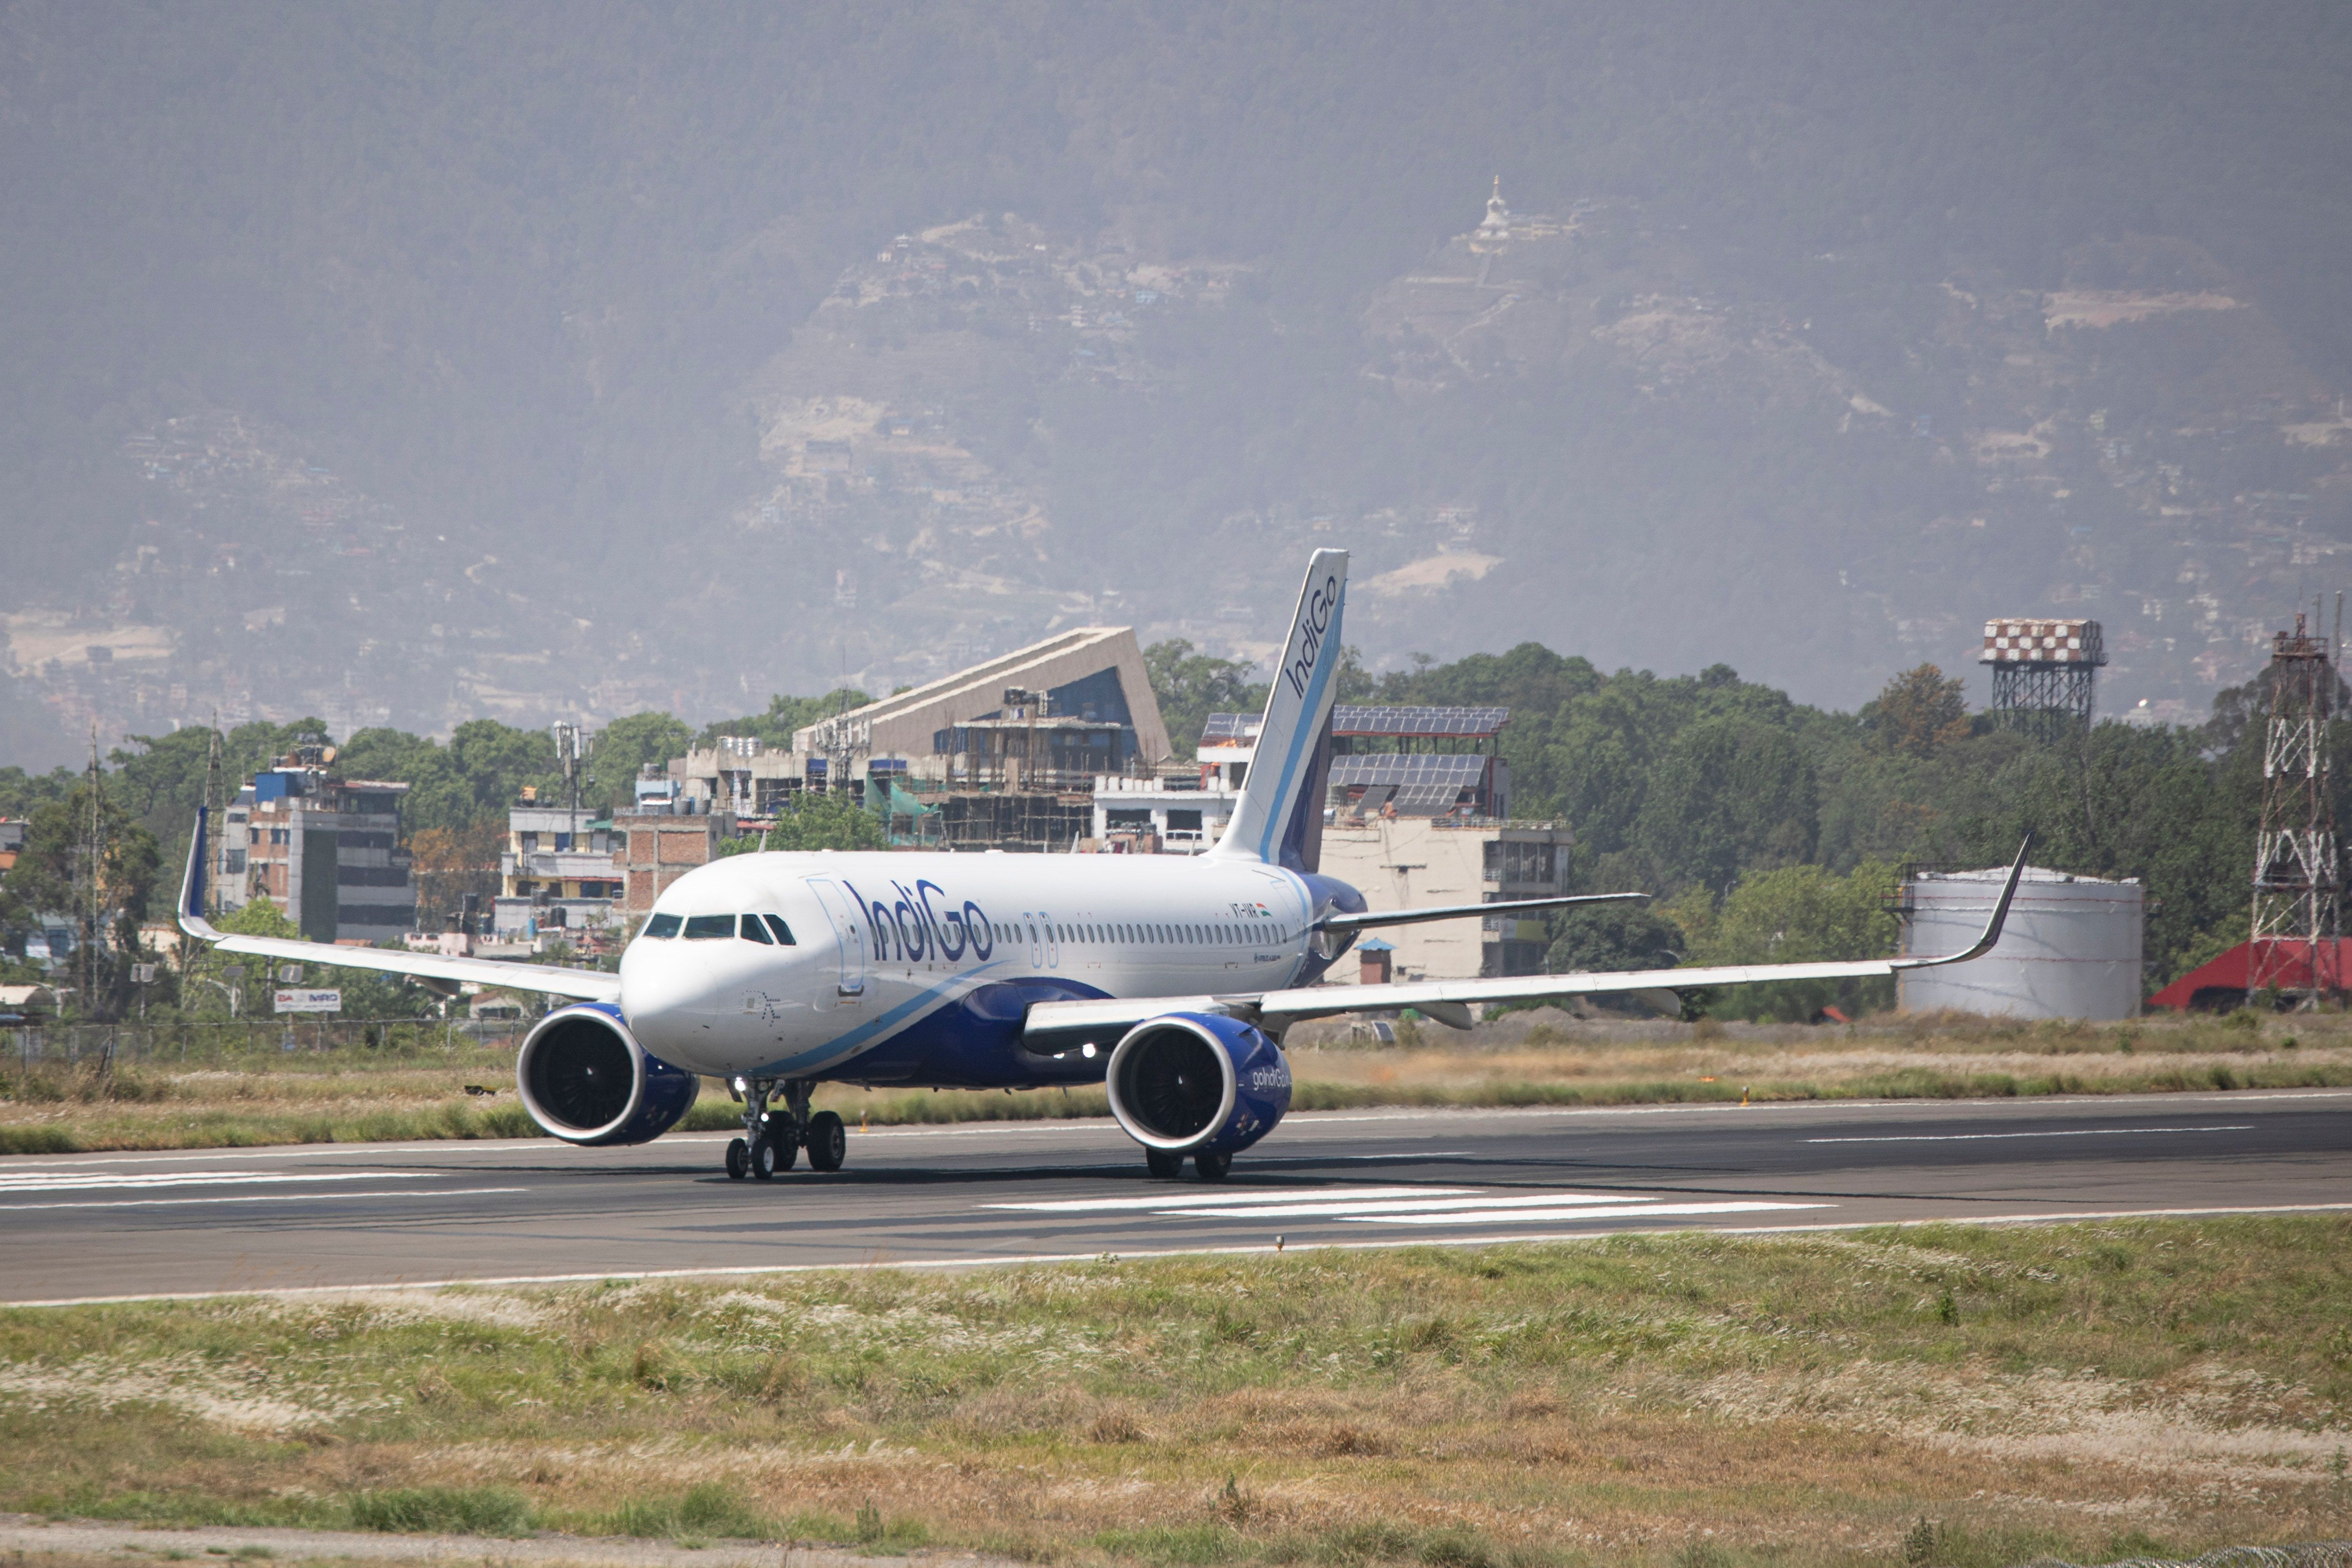 Indigo Airbus A320neo aircraft as seen on the runway and taxiway taxiing for departure at Kathmandu Tribhuvan International Airport in Nepal.